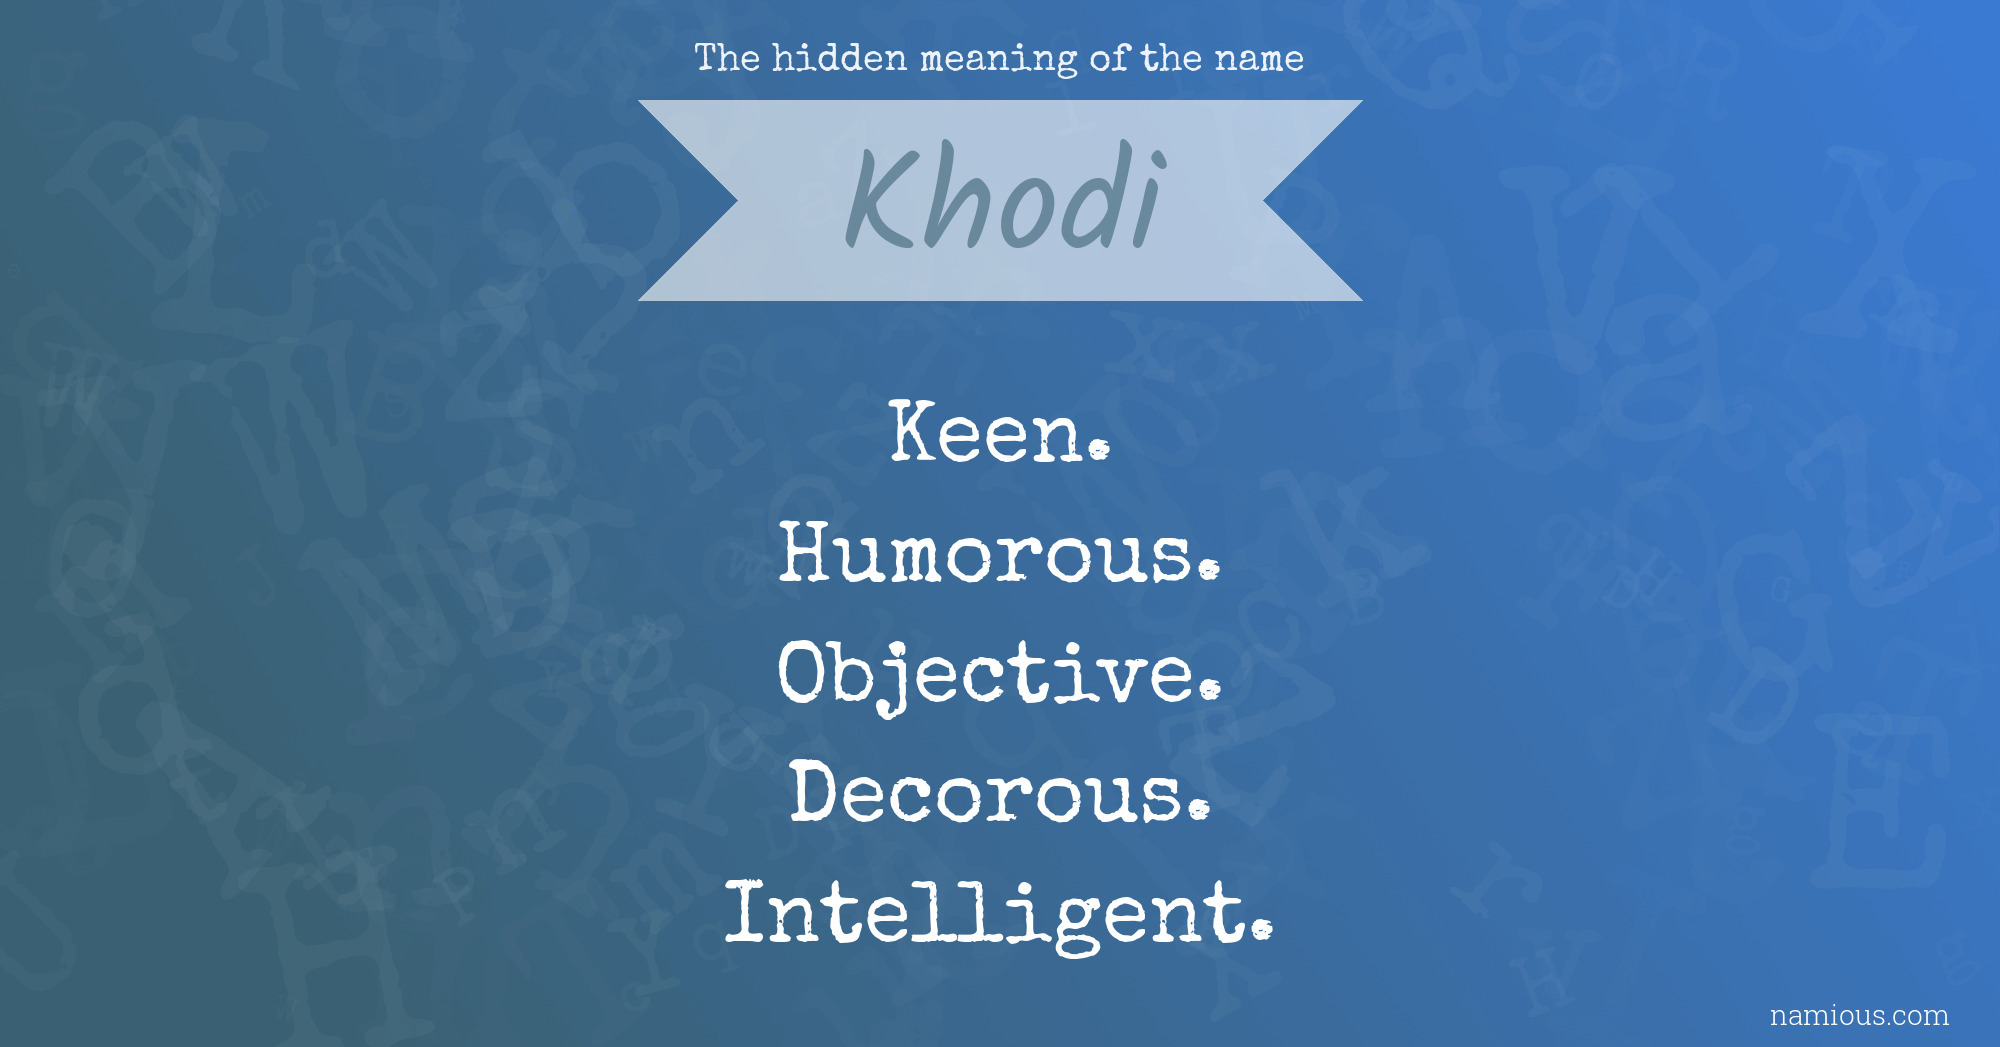 The hidden meaning of the name Khodi